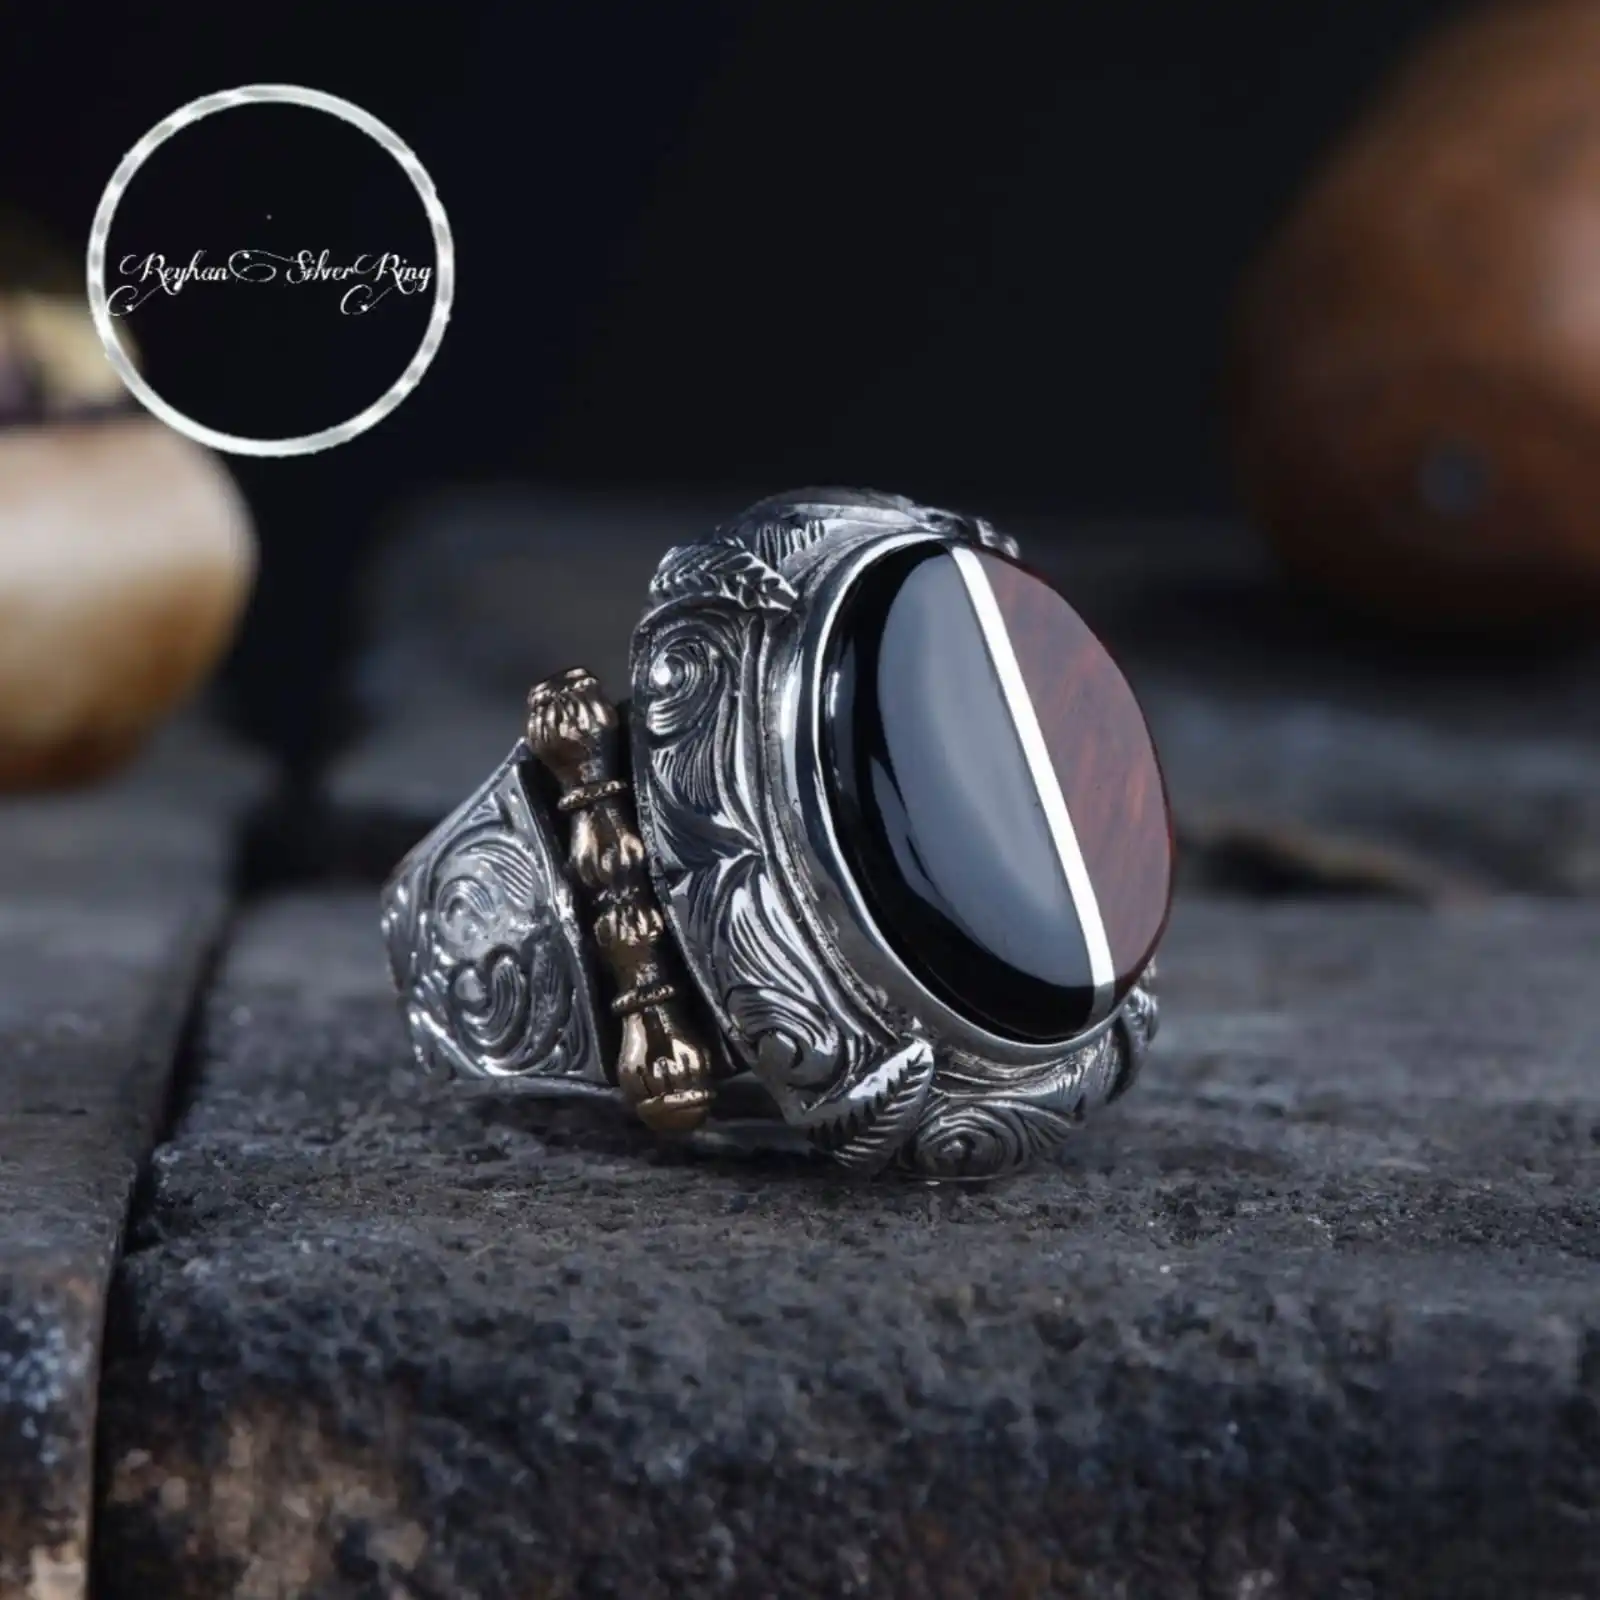 Handcrafted Silver Inlaid Men's Ring with Coca and Oltu Stone - Unique Splitting and Pencil Engraved Design piece ceramic pizza stone with steel holder 13